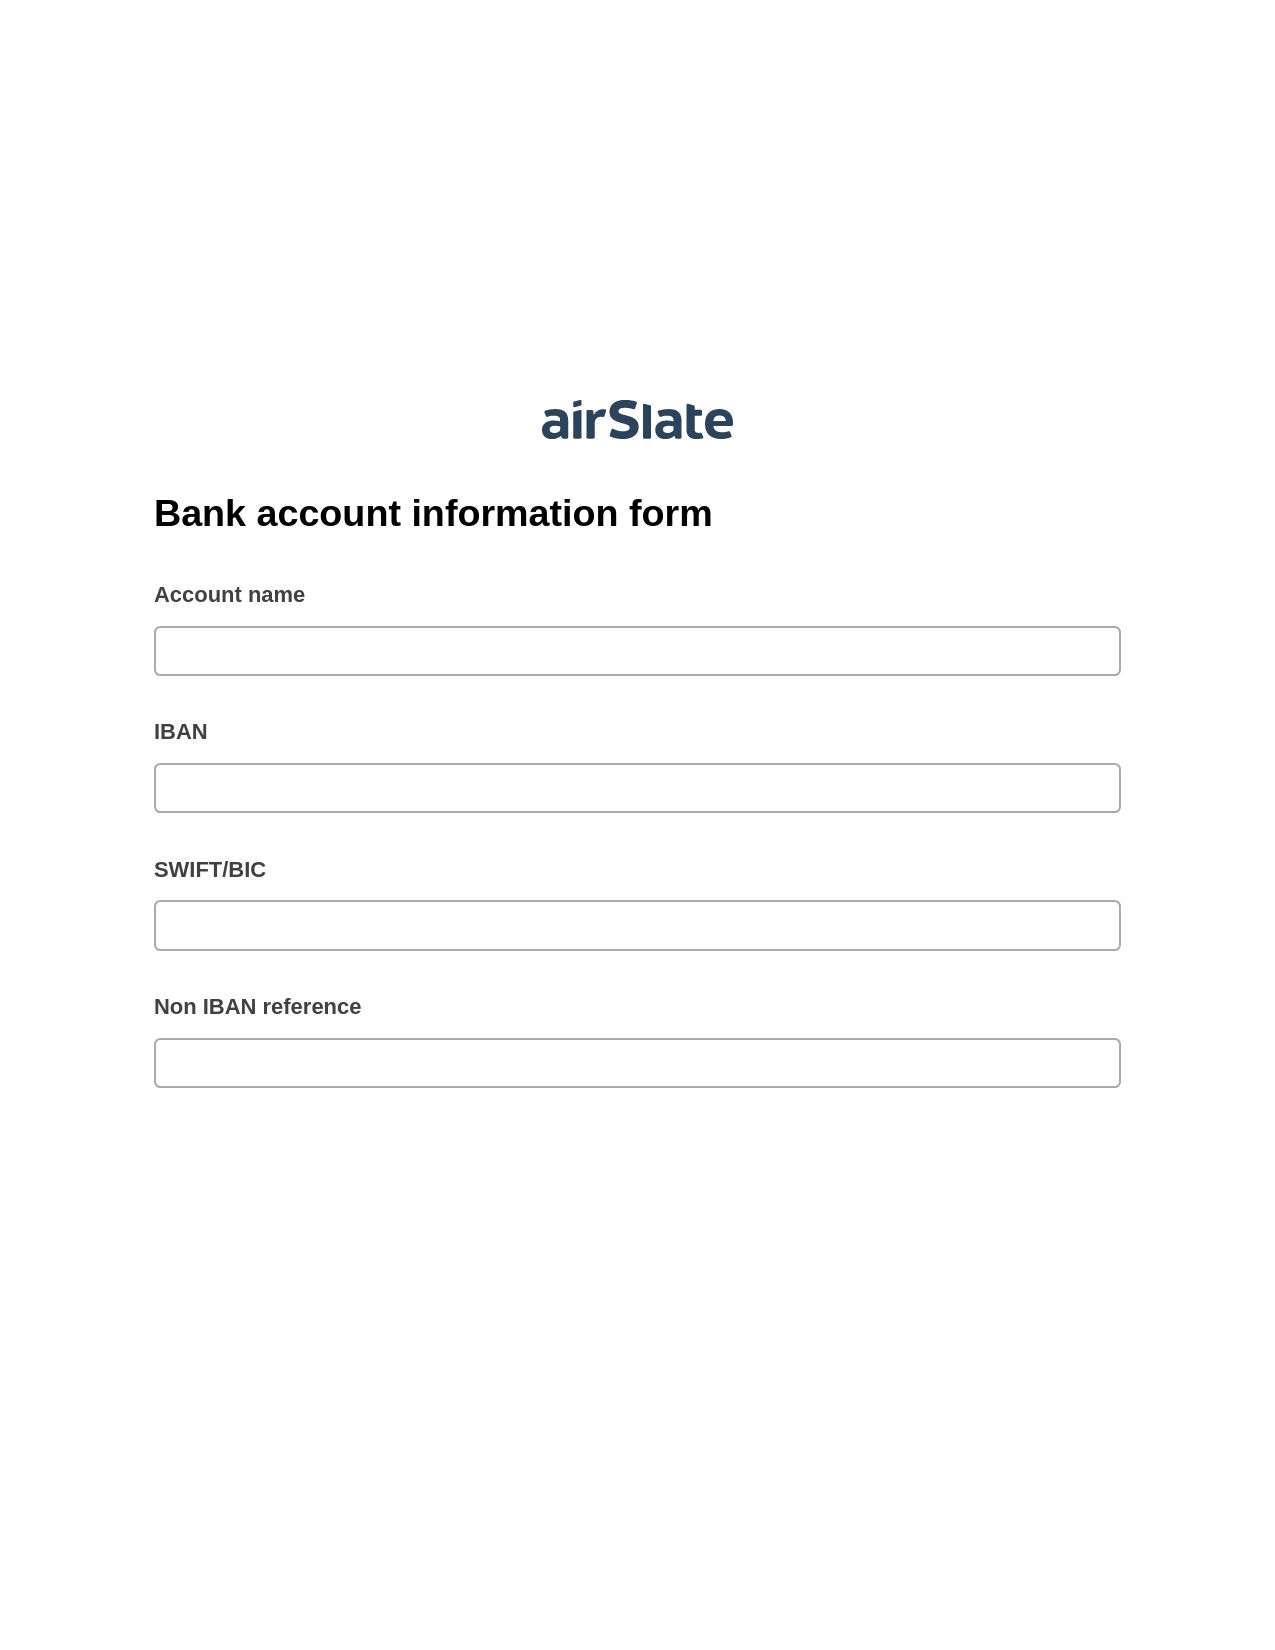 Multirole Bank account information form Pre-fill Dropdown from Airtable, Send a Slate with Roles Bot, Post-finish Document Bot